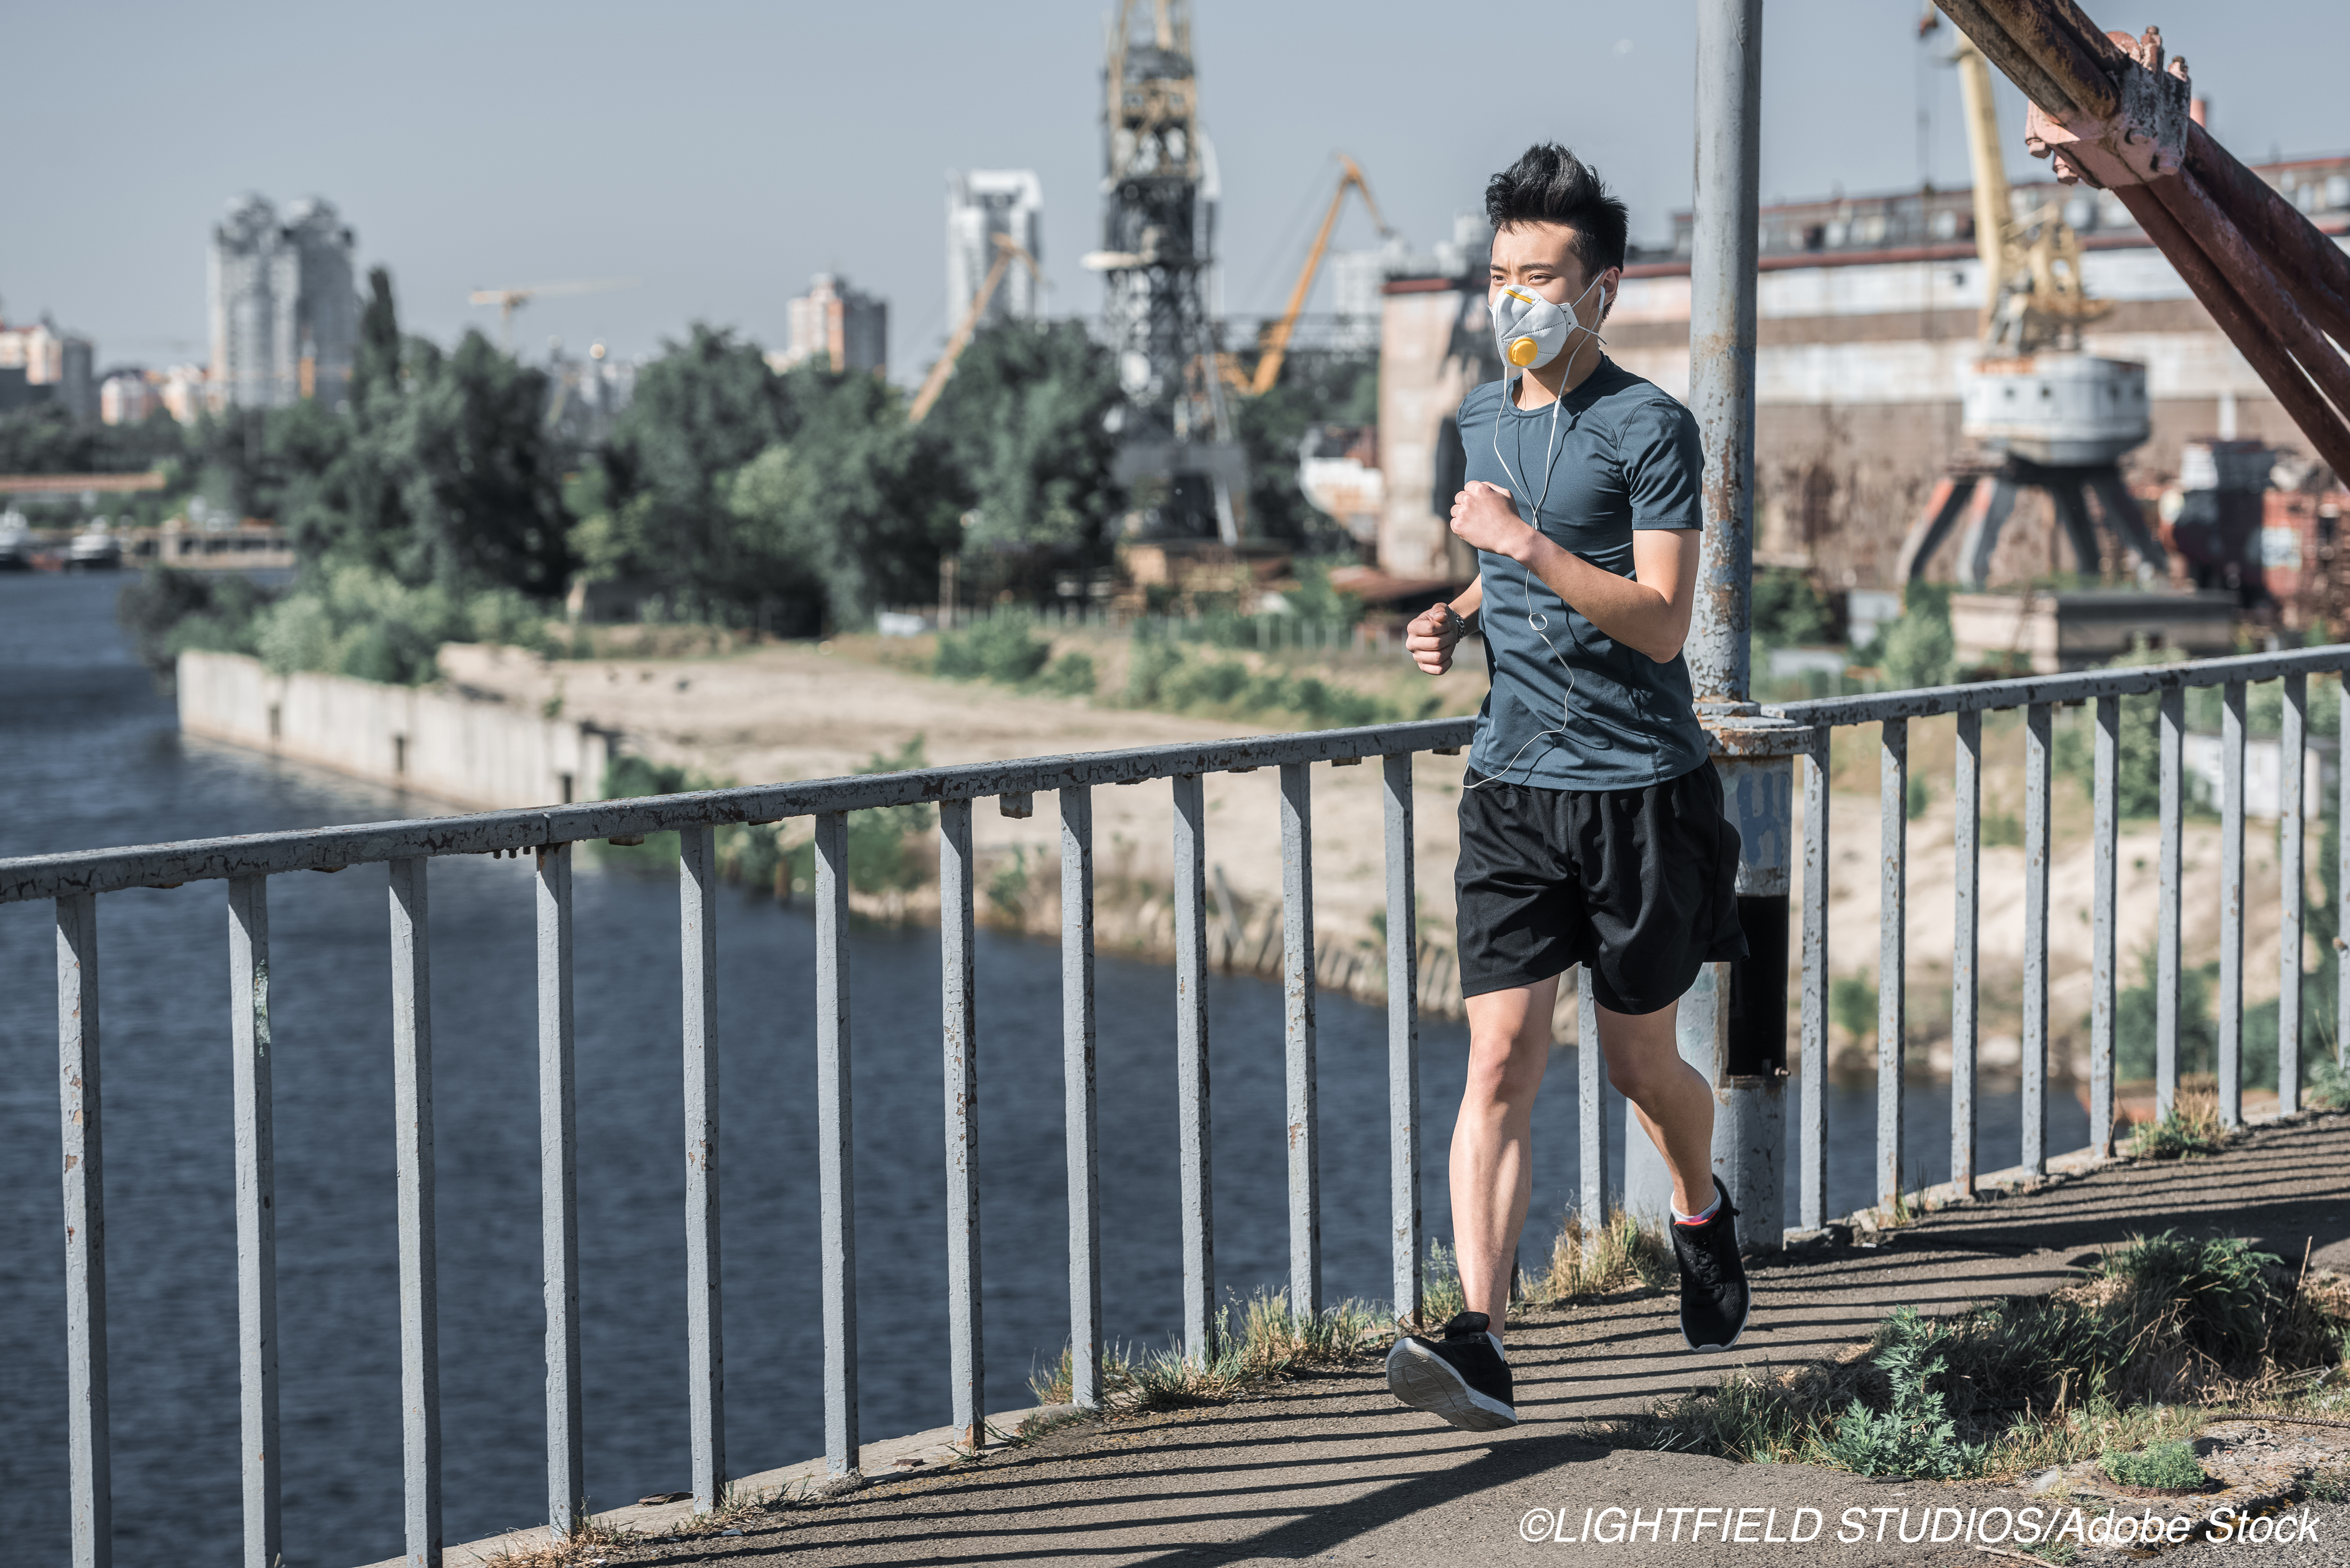 Breathing Dirty Air During Vigorous Exercise Increases CVD Risk in Young Adults